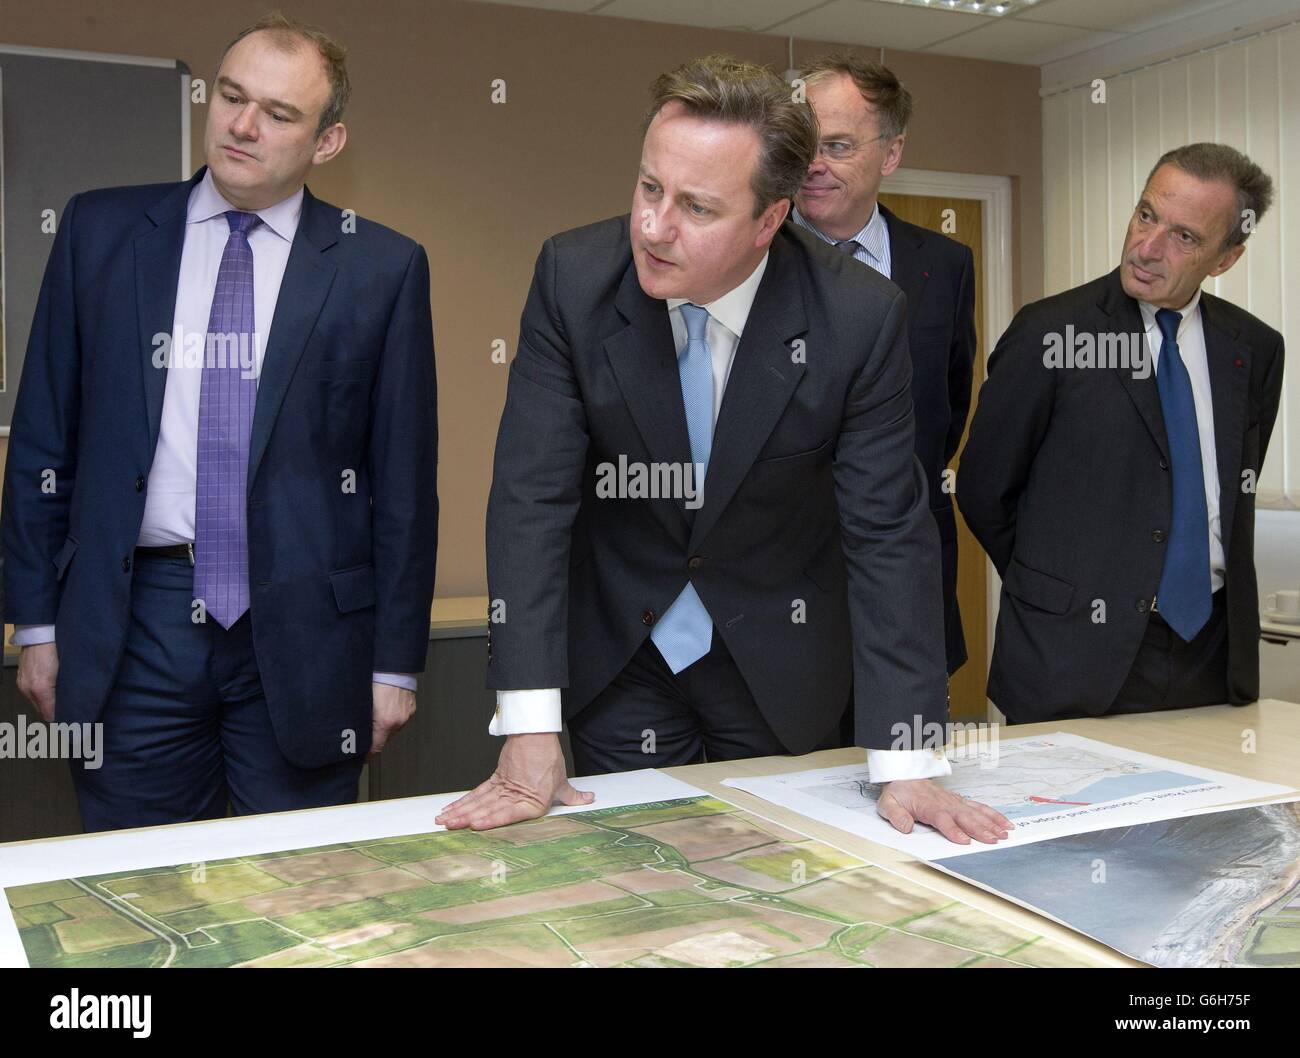 (left to right) Energy Secretary Ed Davey, Prime Minister David Cameron, Vincent de Rivaz, Chief Executive of EDF (Electricite de France) and Henri Proglio, CEO and Chairman of EDF as they examine site plans for the news Hinkly C nuclear power station at Hinkley Point, Somerset. Britain's first new nuclear power station in a generation is to be built under the &Acirc;&pound;16 billion project which will create thousands of new jobs. Stock Photo